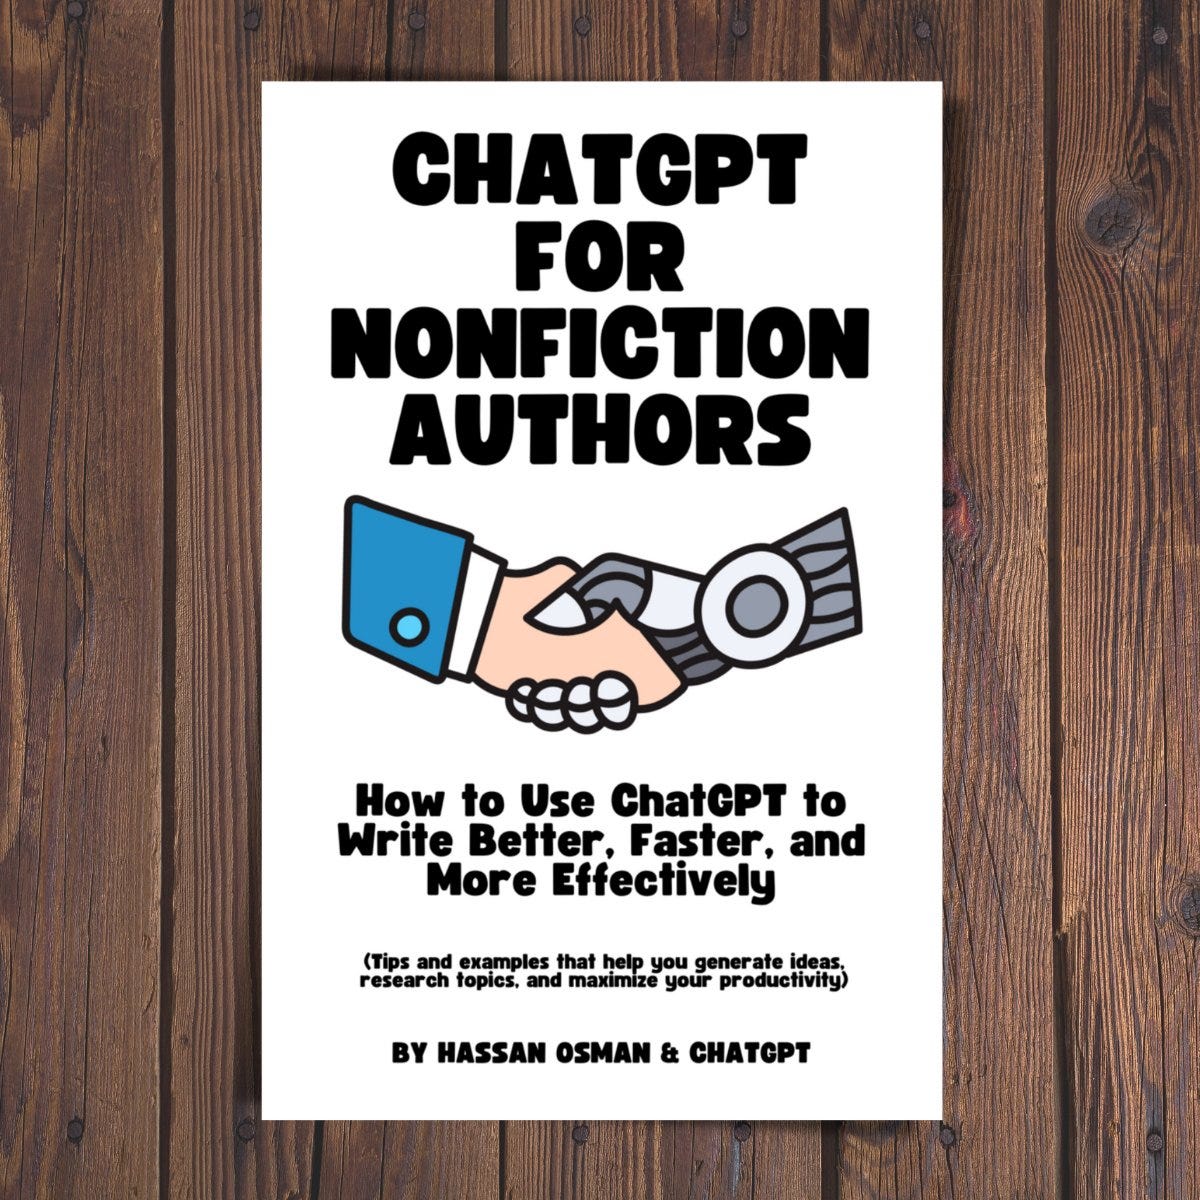 "ChatGPT for Nonfiction Authors" book cover